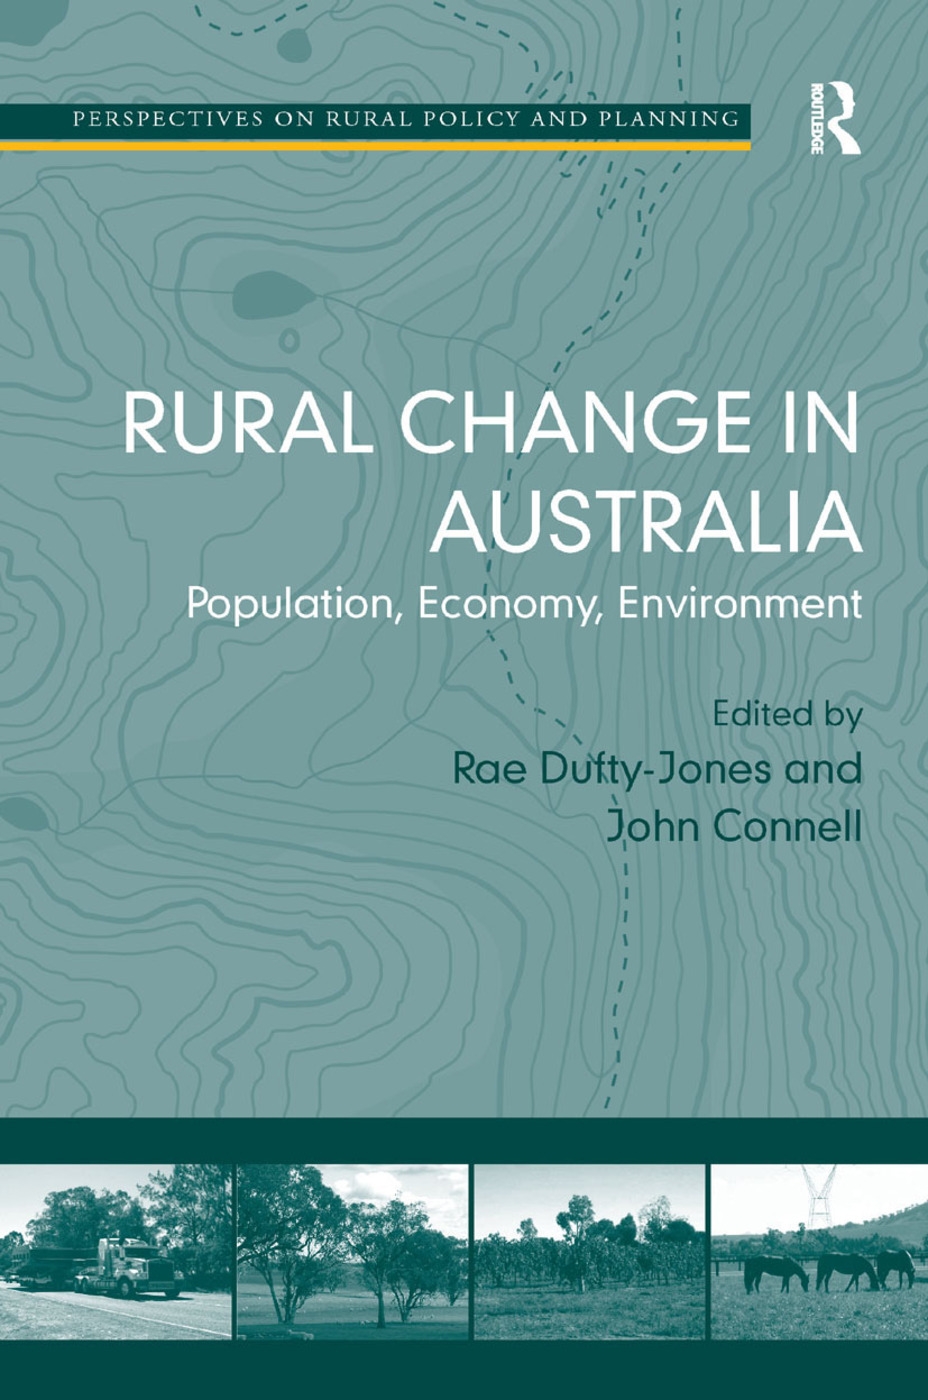 Rural Change in Australia: Population, Economy, Environment. by Rae Dufty-Jones and John Connell